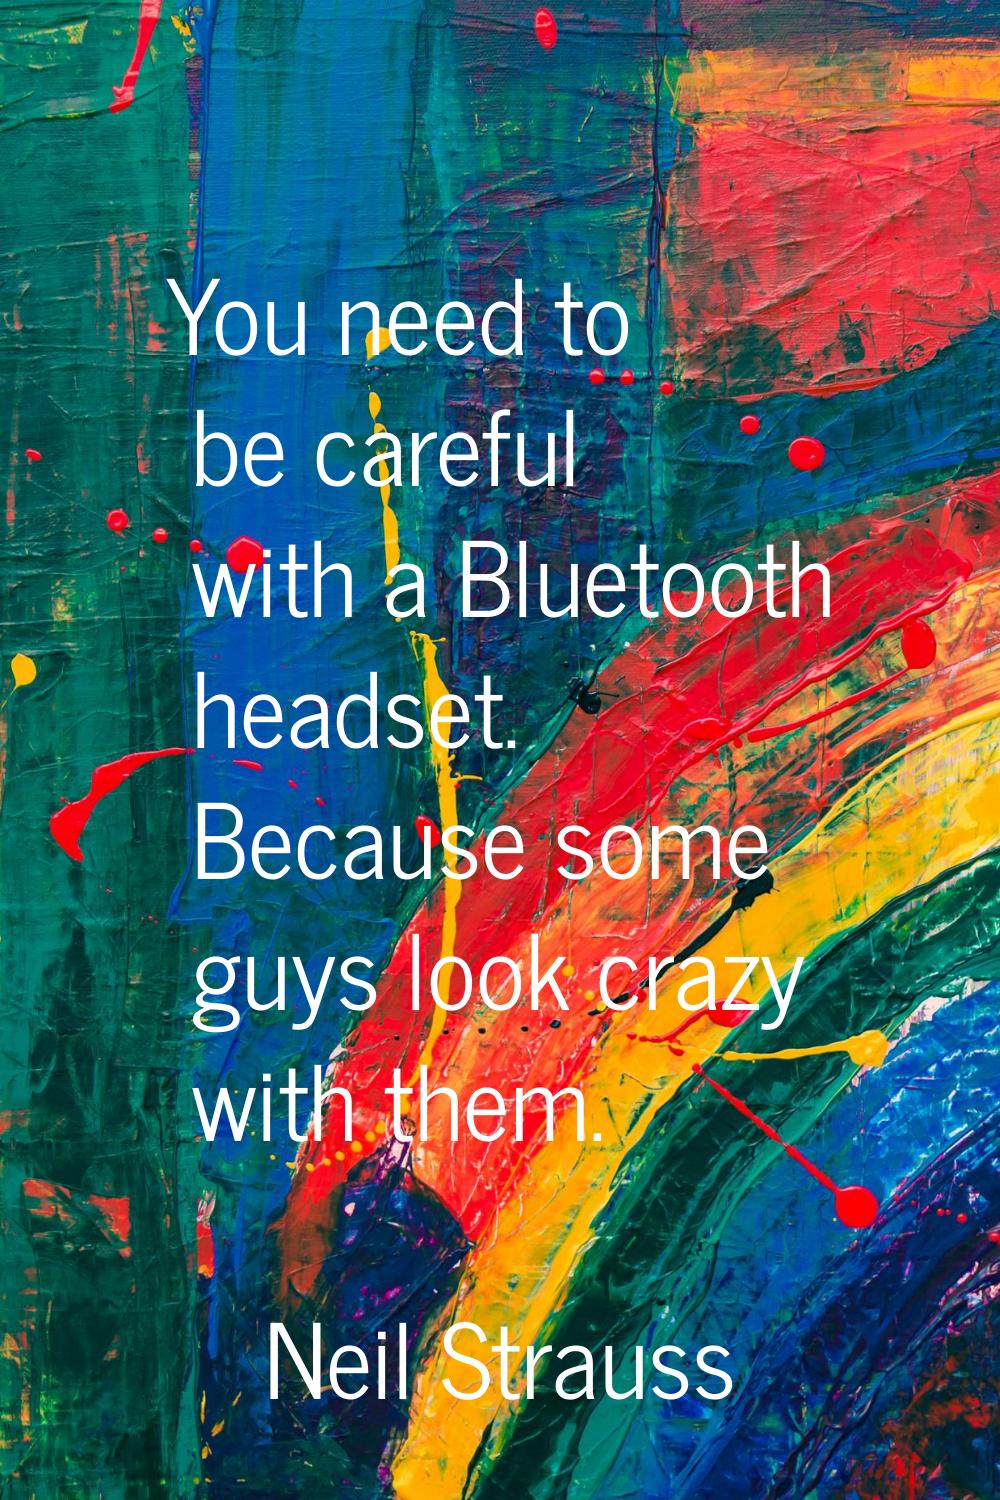 You need to be careful with a Bluetooth headset. Because some guys look crazy with them.